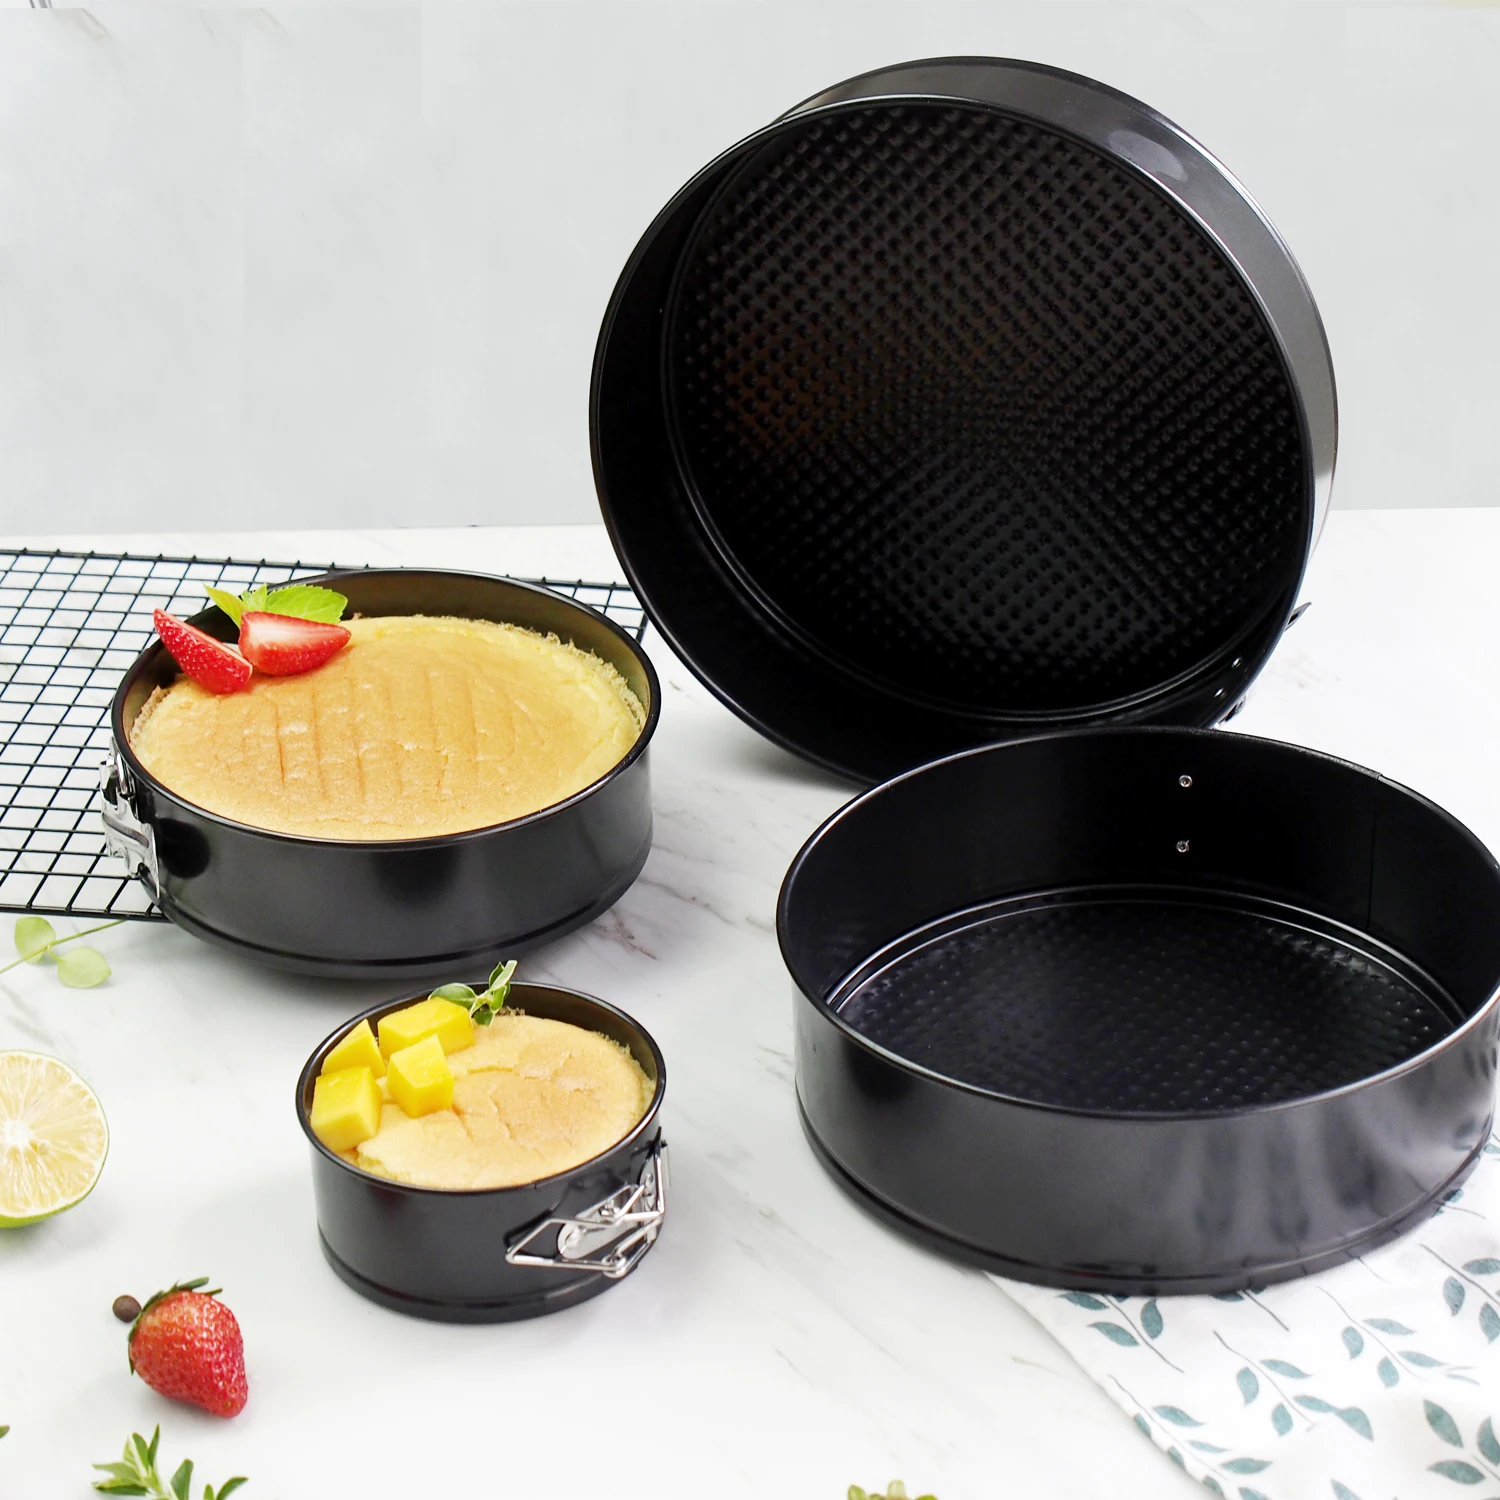 

6 inch Springform Pan Non-stick Set of 3 Cake Pans Set with Removable Bottom Cheesecake round pan cake mold, Black